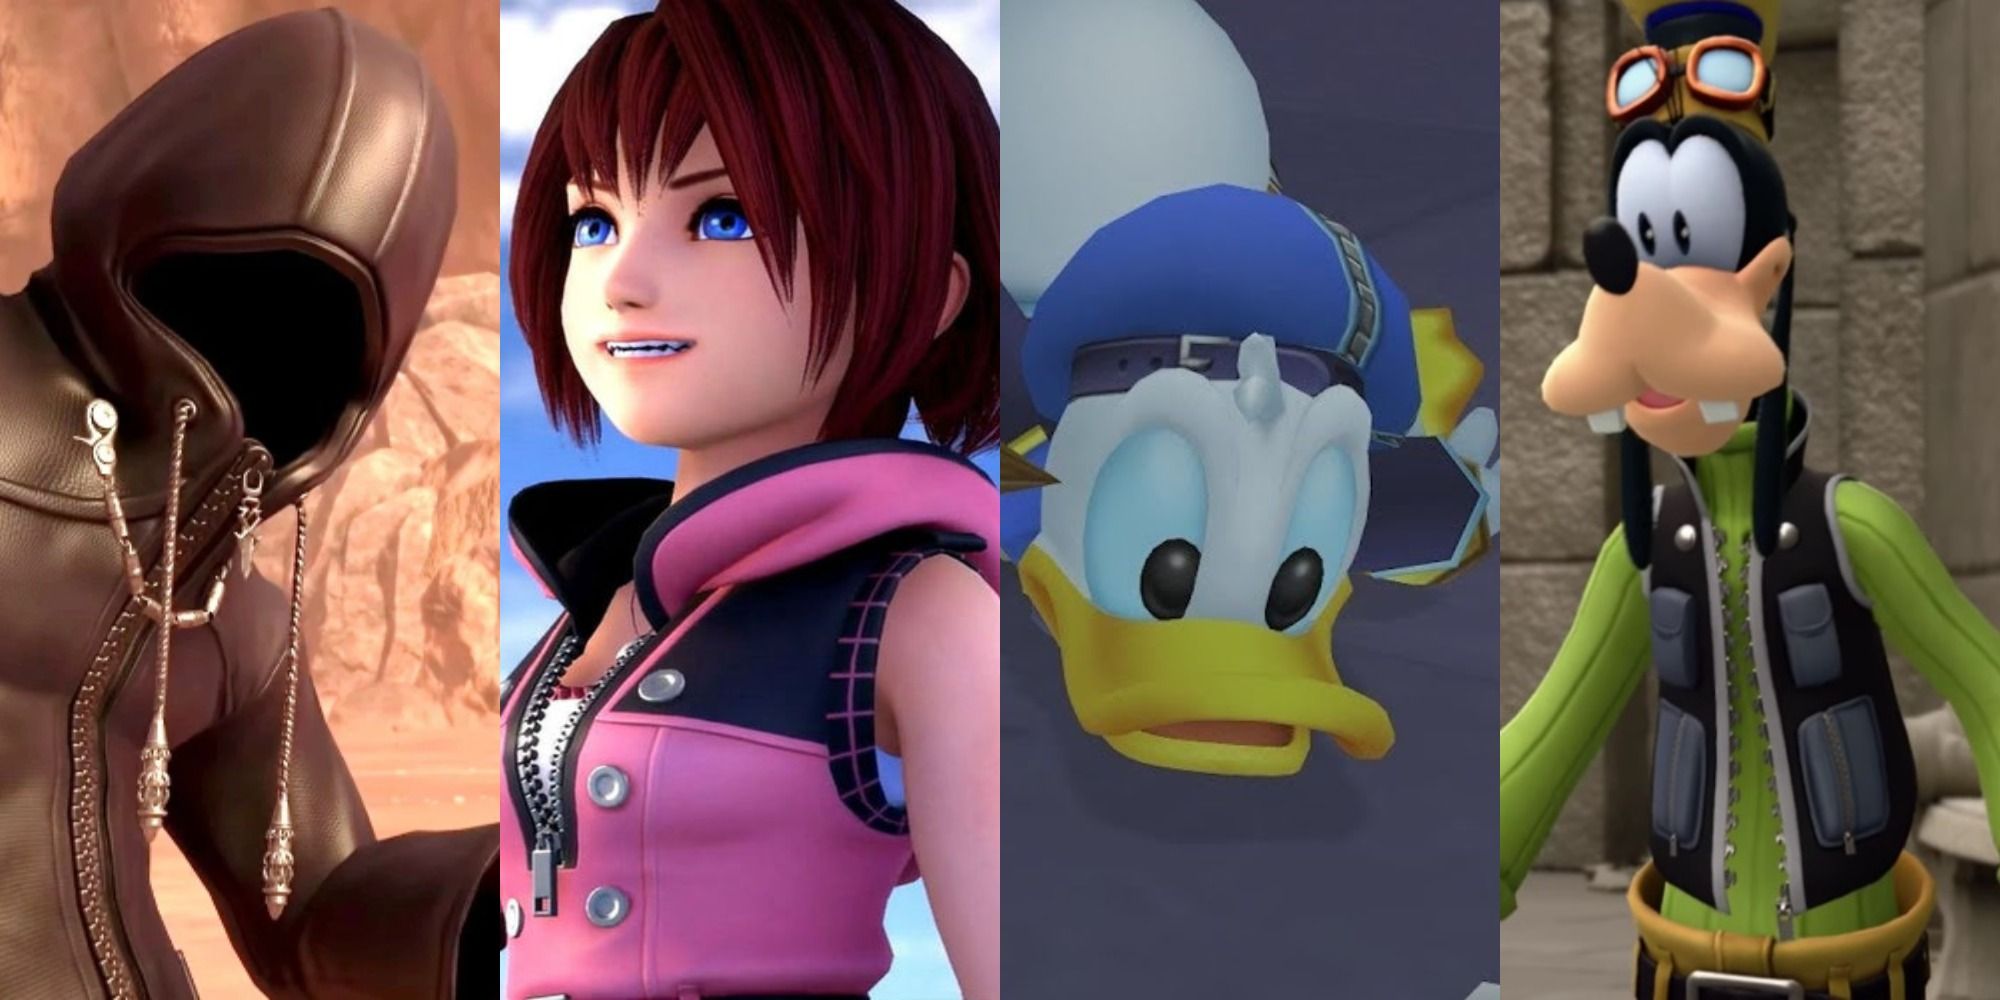 A split image of screenshots from the Kingdom Hearts franchise